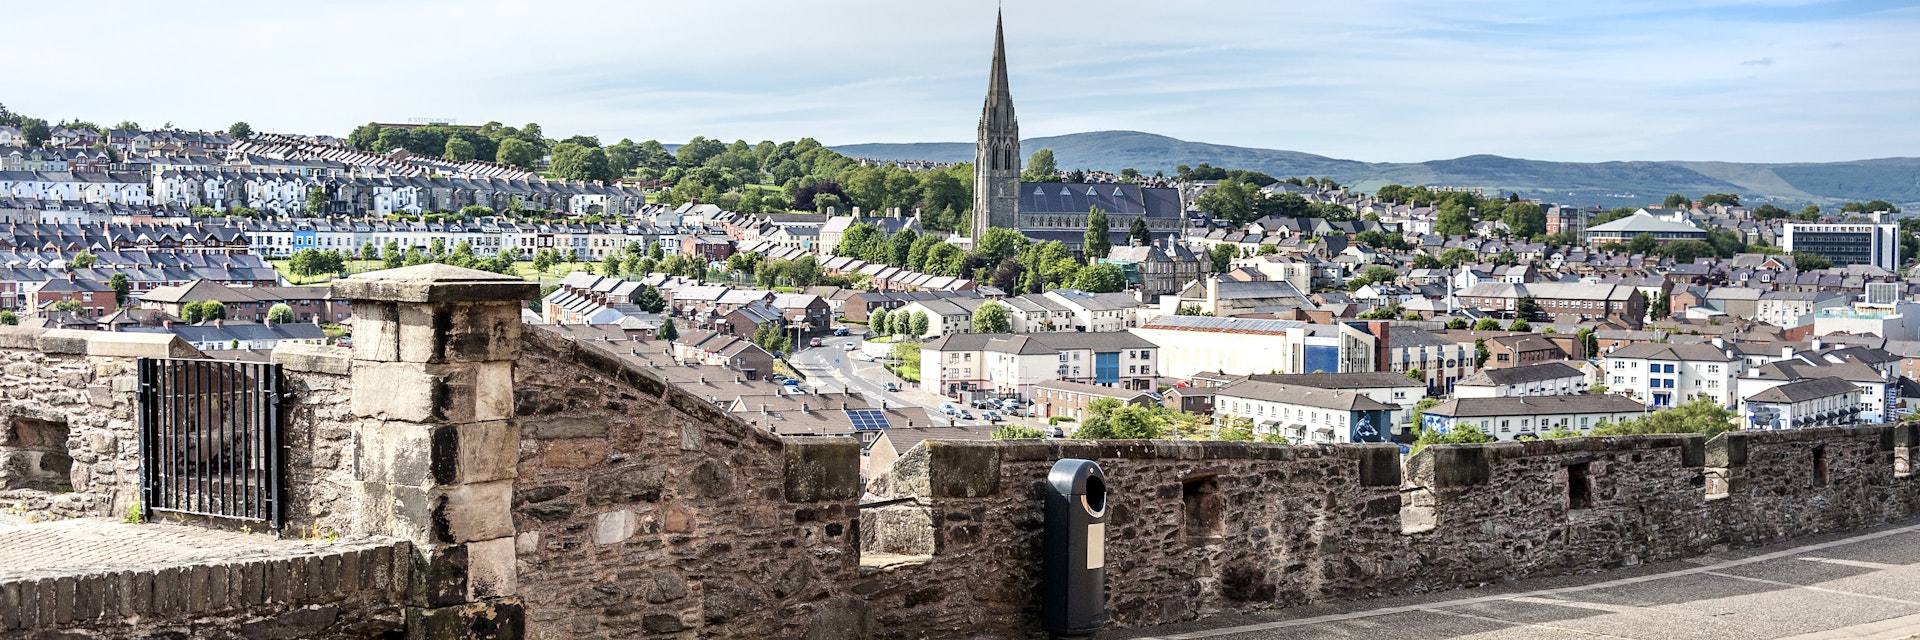 June 23, 2015: The skyline of Derry with St. Eugene's Cathedral near Free Derry Corner and the city wall.